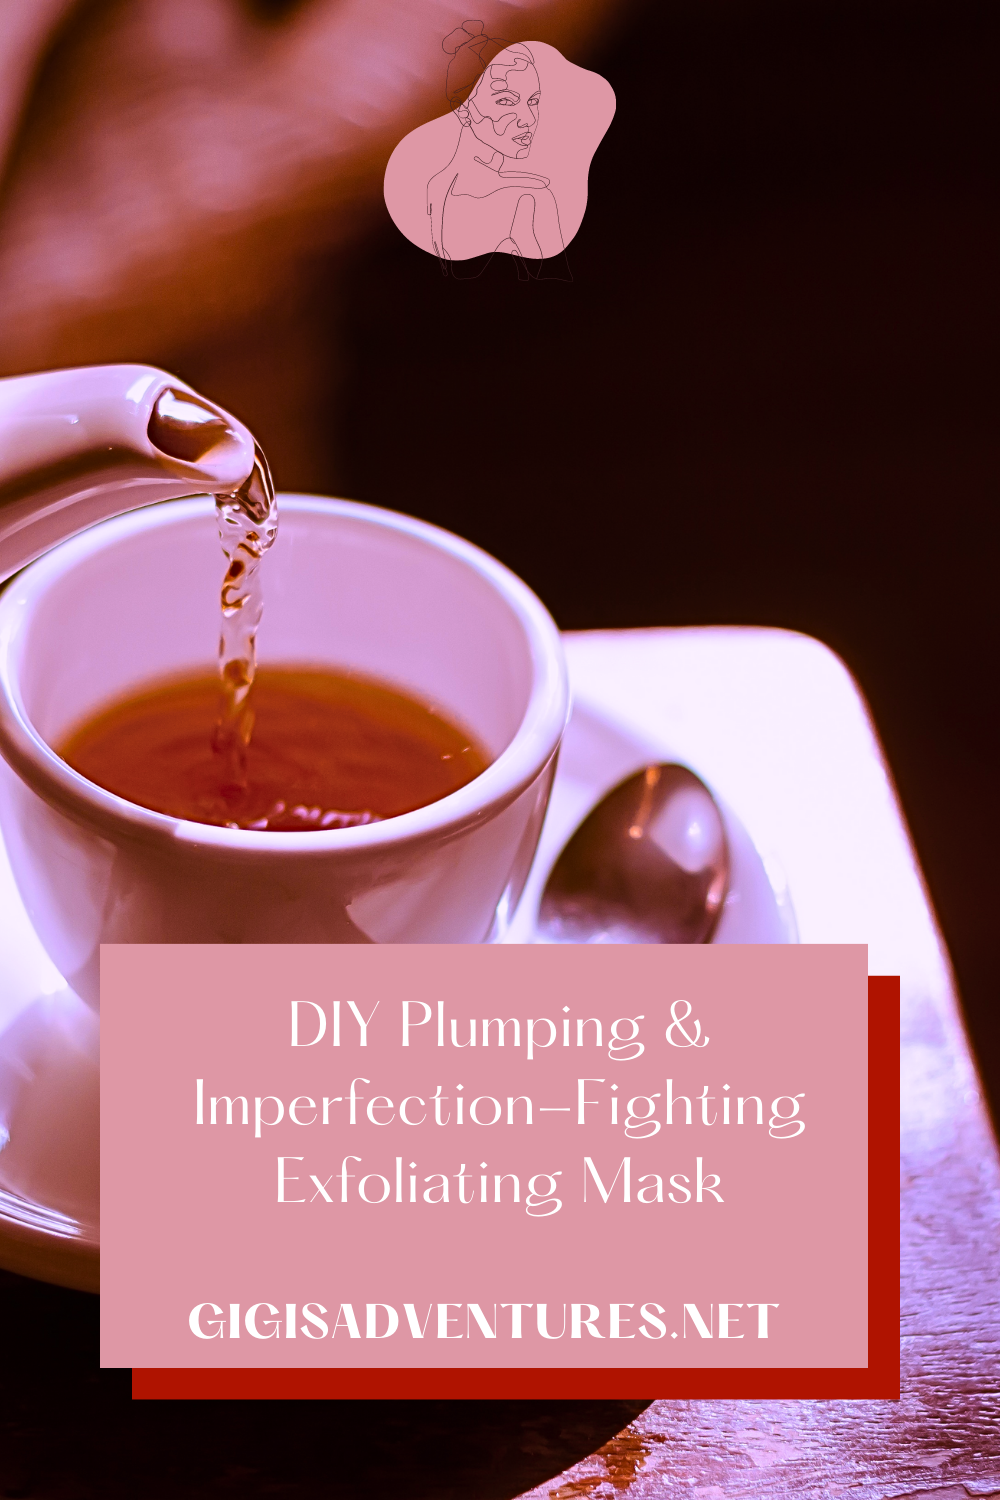 DIY Plumping & Imperfection-Fighting Exfoliating Mask for Acne Prone Skin